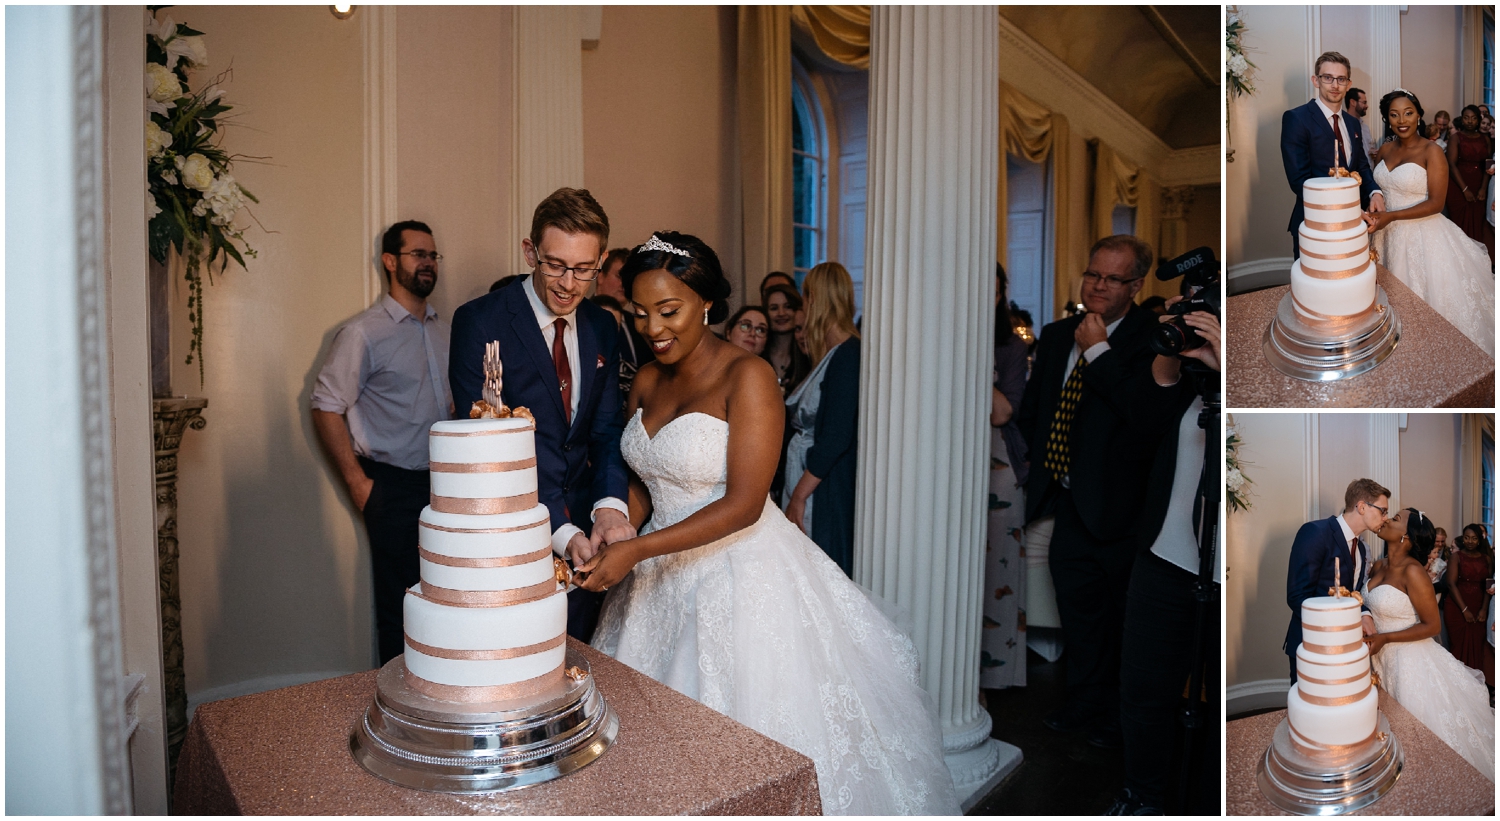 Bride and groom cut the cake at their Colwick Hall wedding